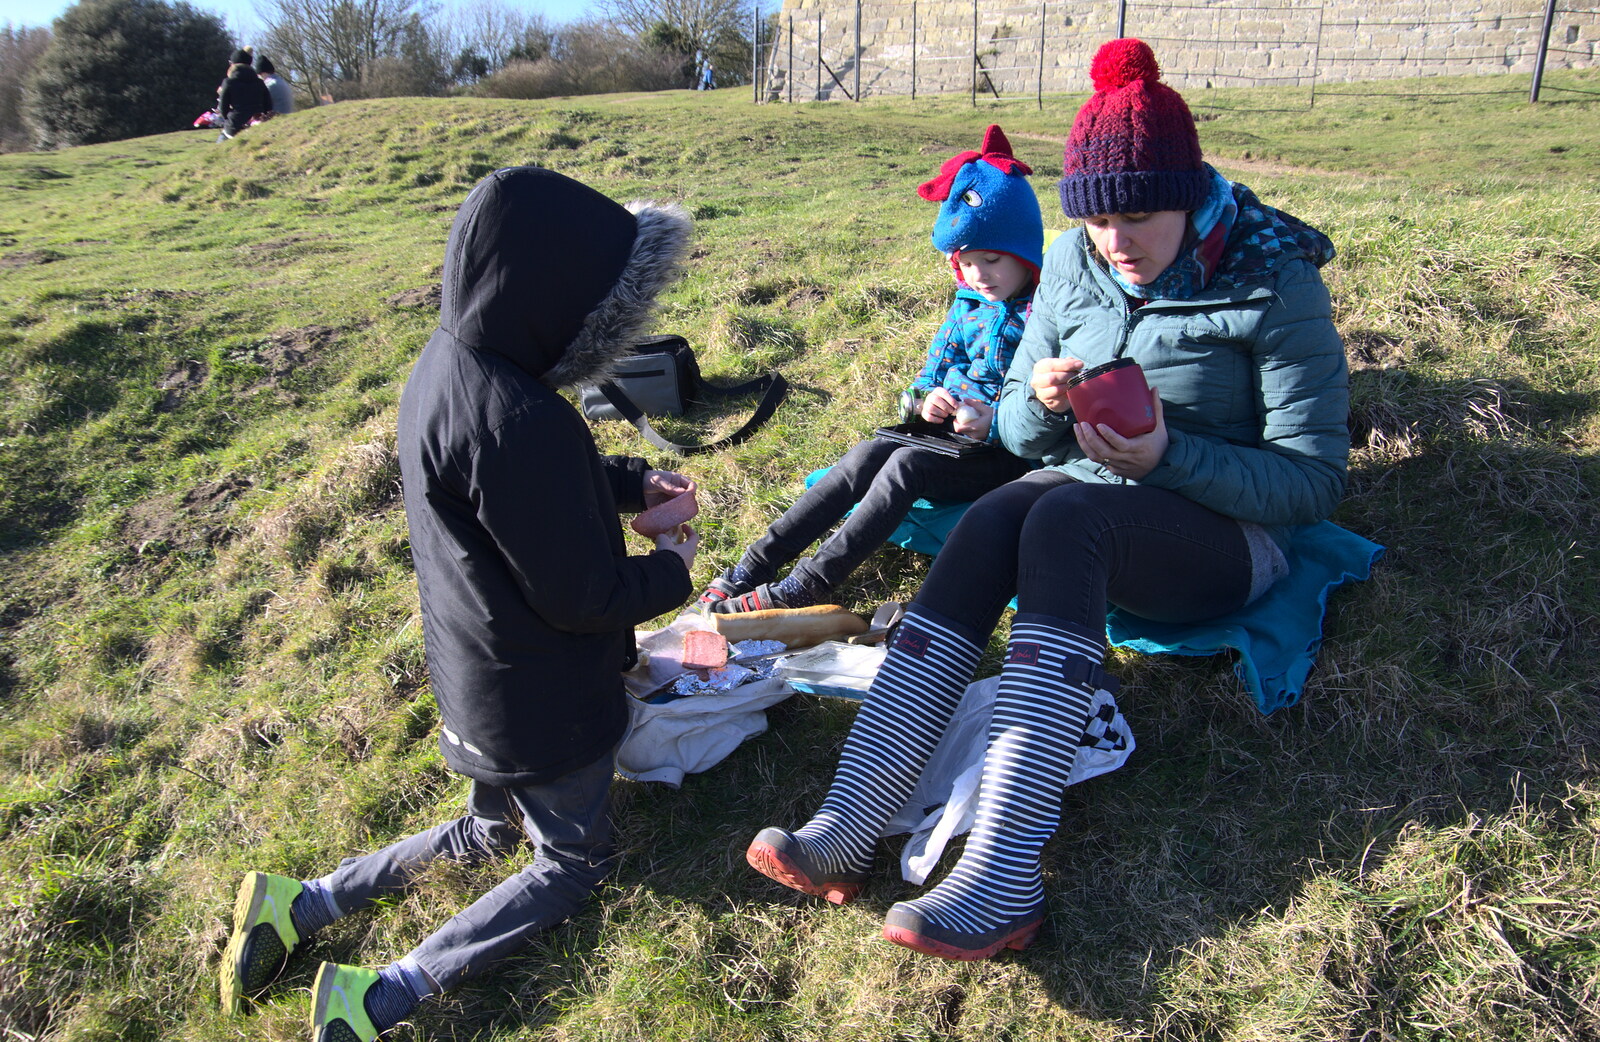 We have a micro-picnic from An Orford Day Out, Orford, Suffolk - 17th February 2018